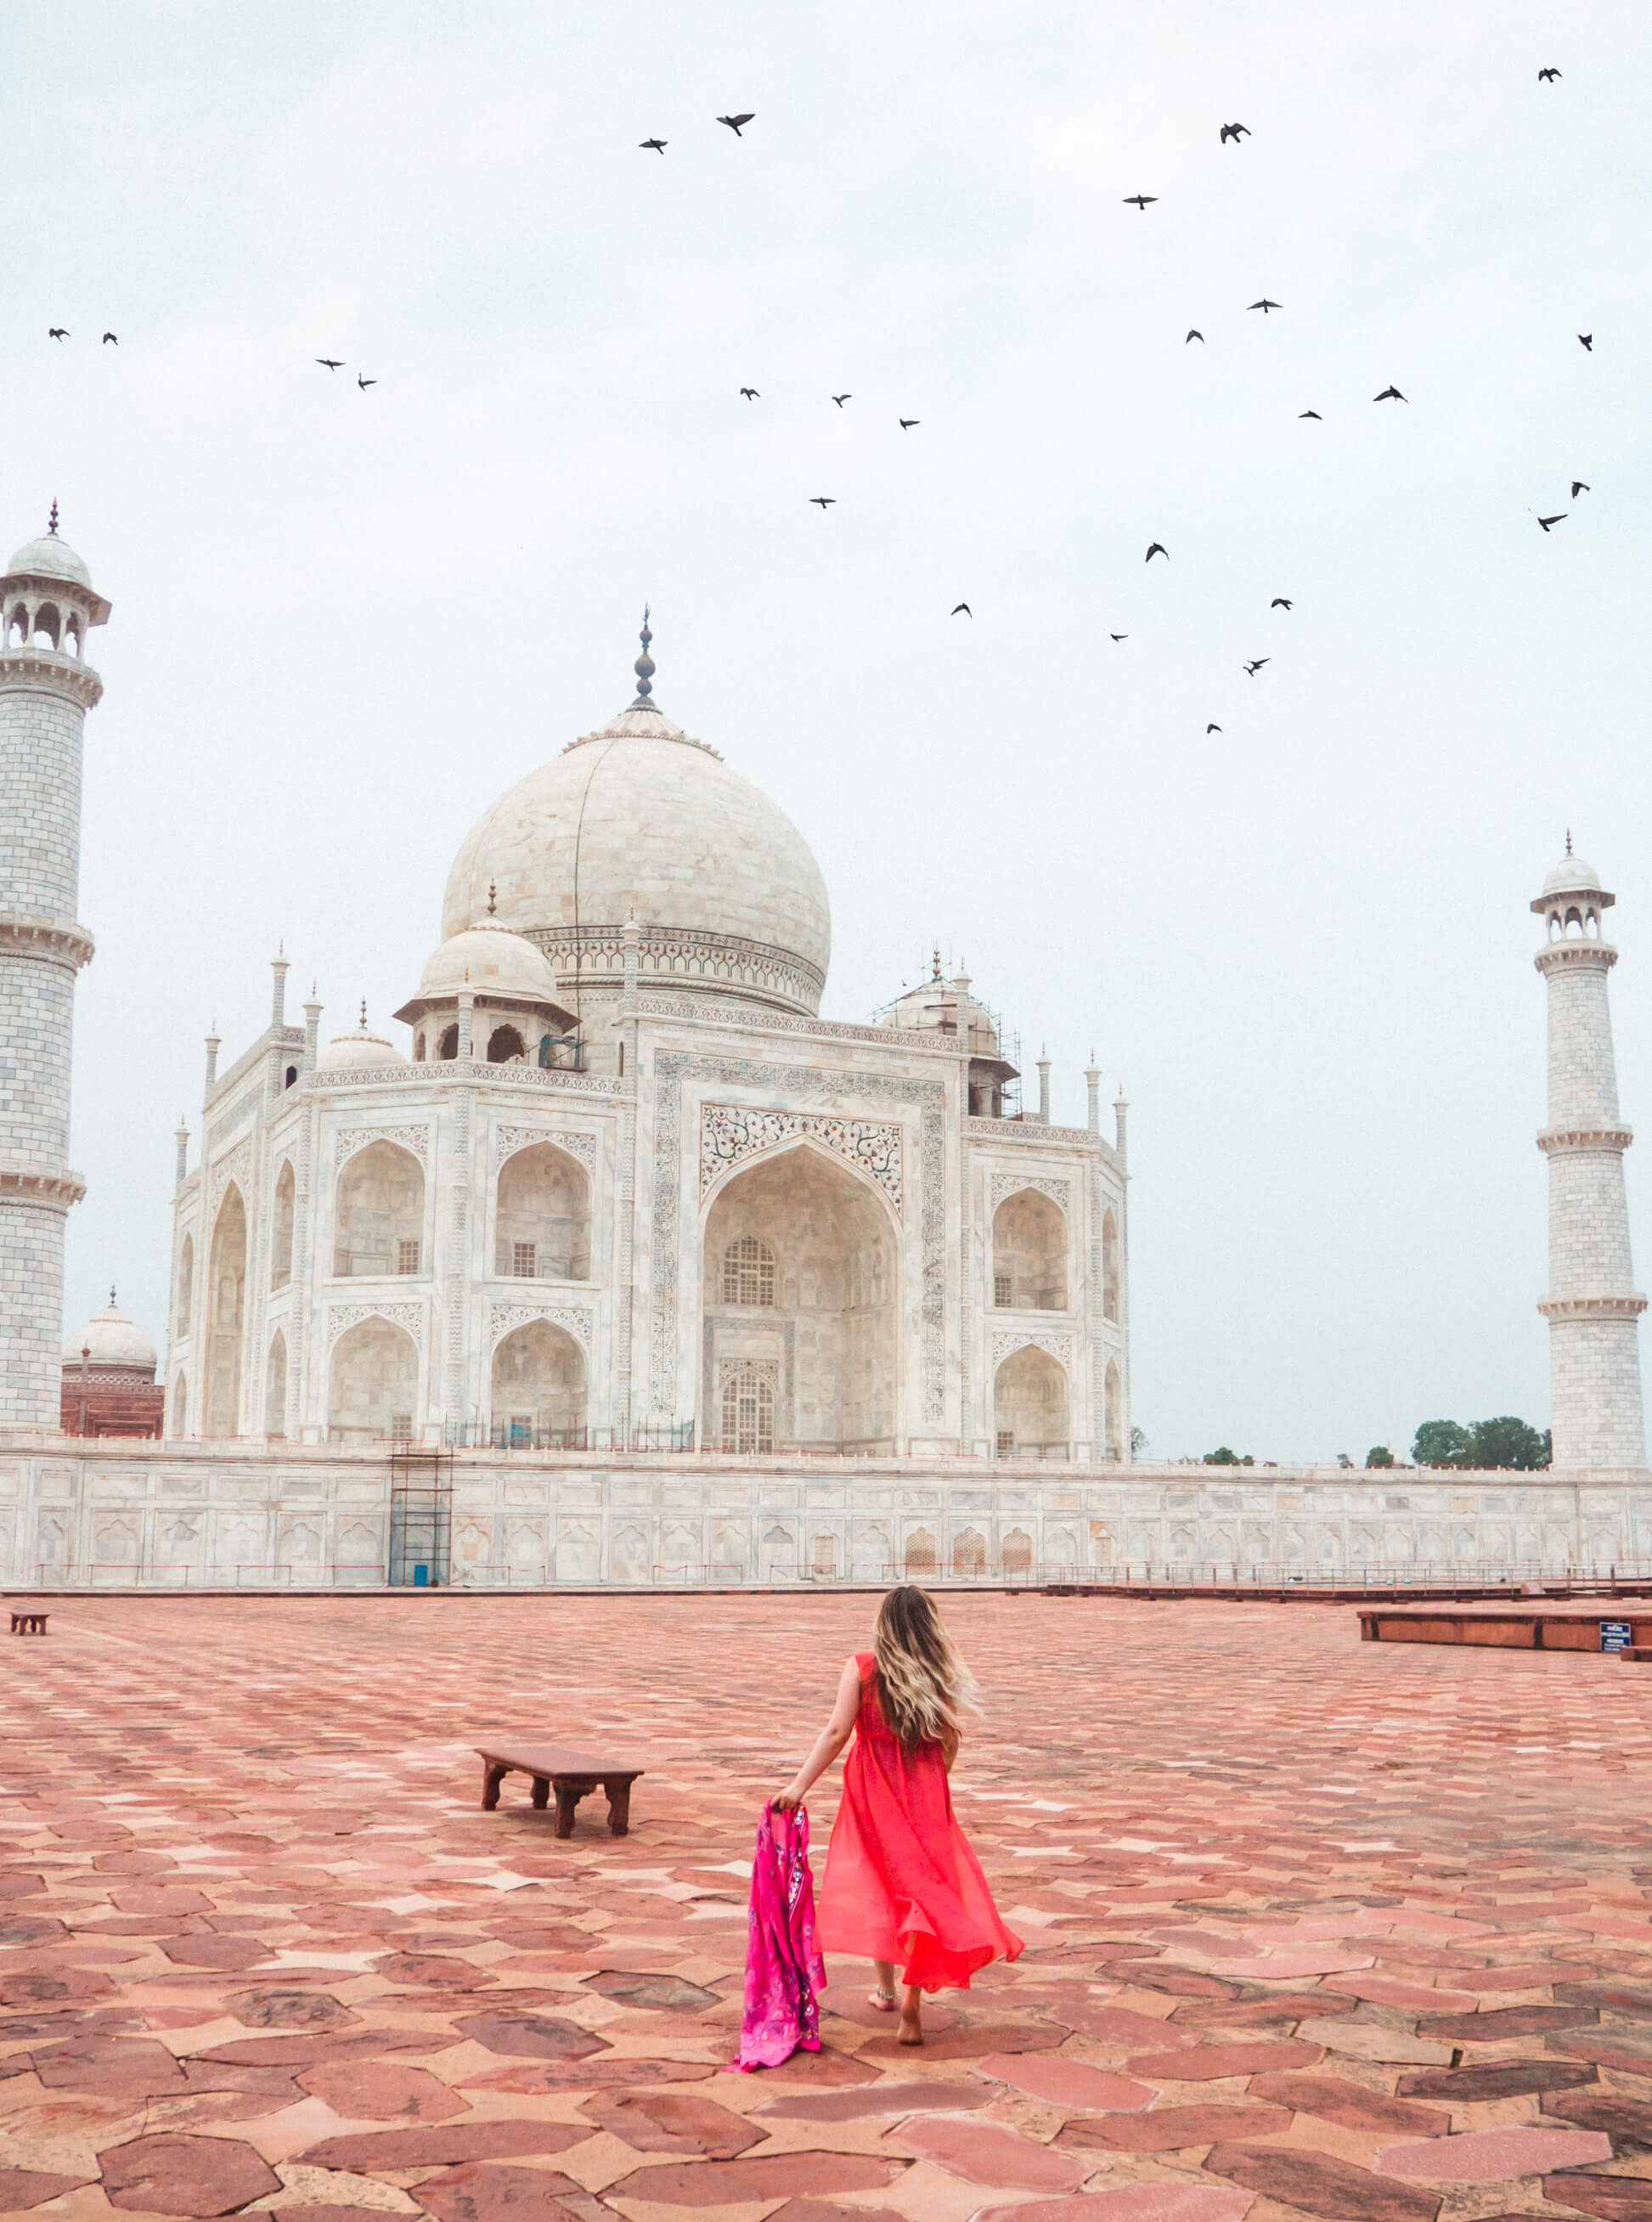 Taj Mahal photography tips - How to beat the crowds